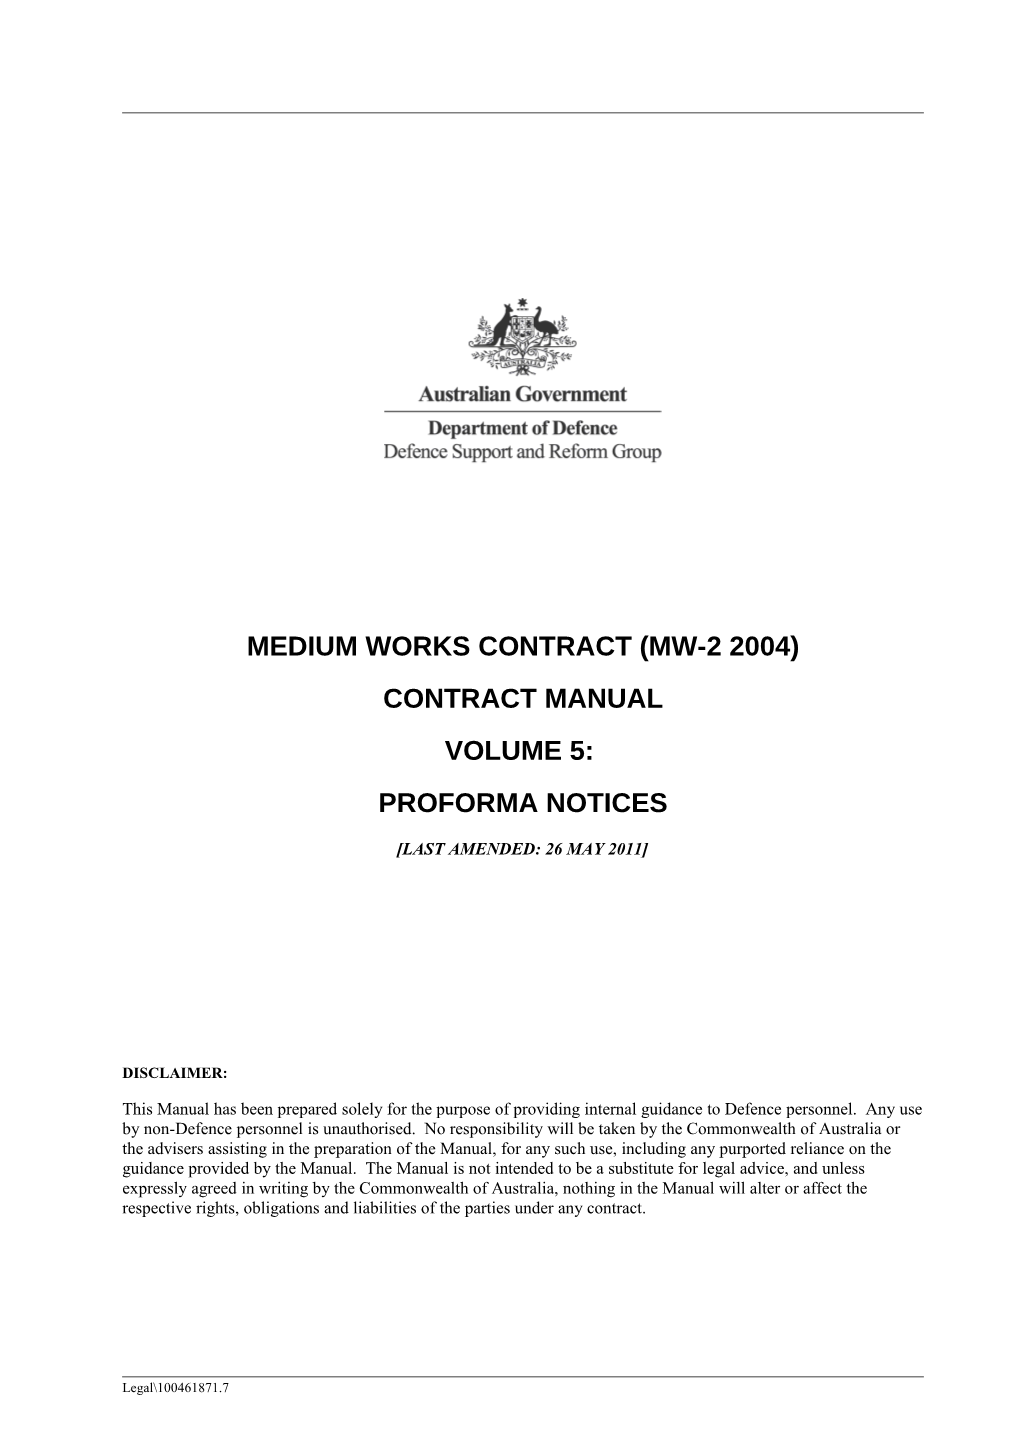 Department of Defence - Medium Works Contract (MW-2 2004) Contract Manual - Volume 5